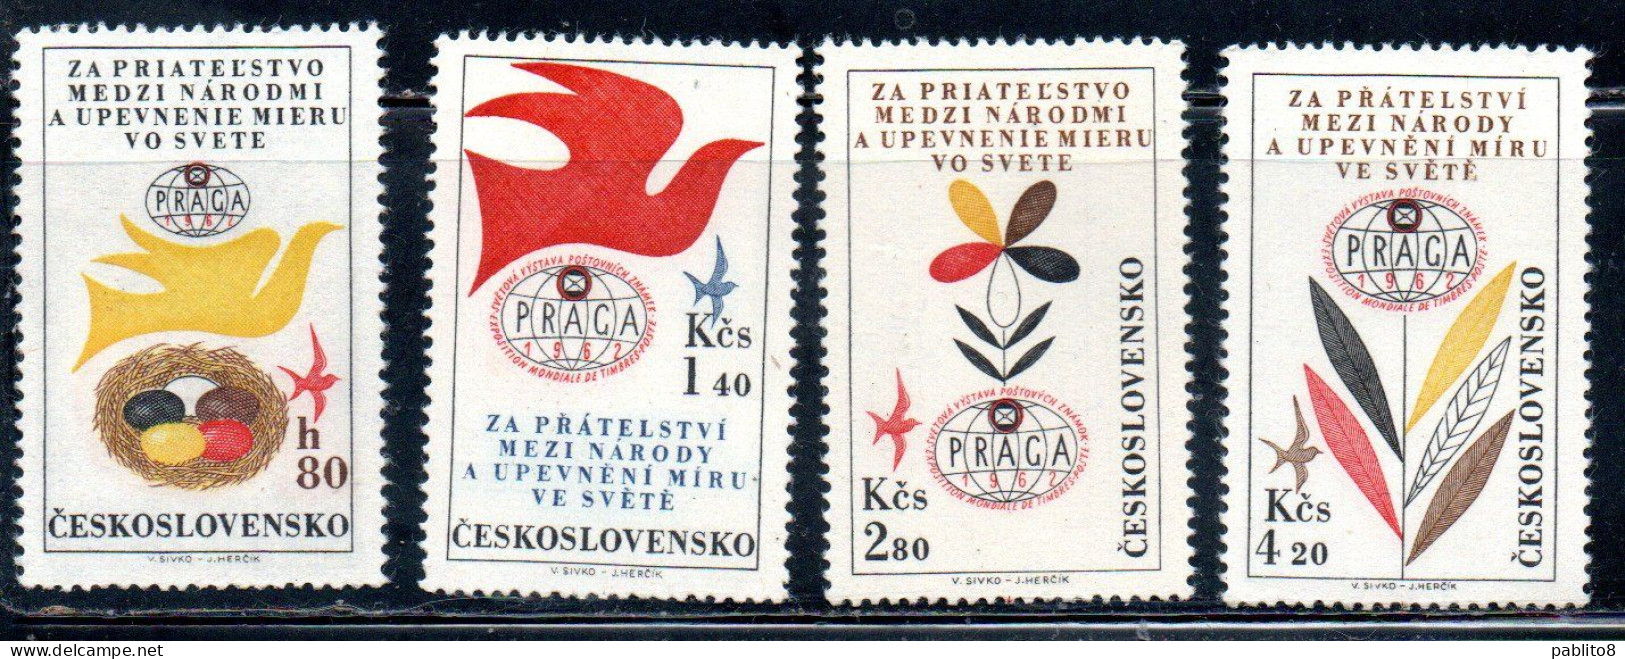 CZECHOSLOVAKIA CECOSLOVACCHIA 1962 AIR POST MAIL AIRMAIL PRAGA 62 WORLD EXHIBITION POSTAGE STAMPS COMPLETE SET SERIE MNH - Airmail